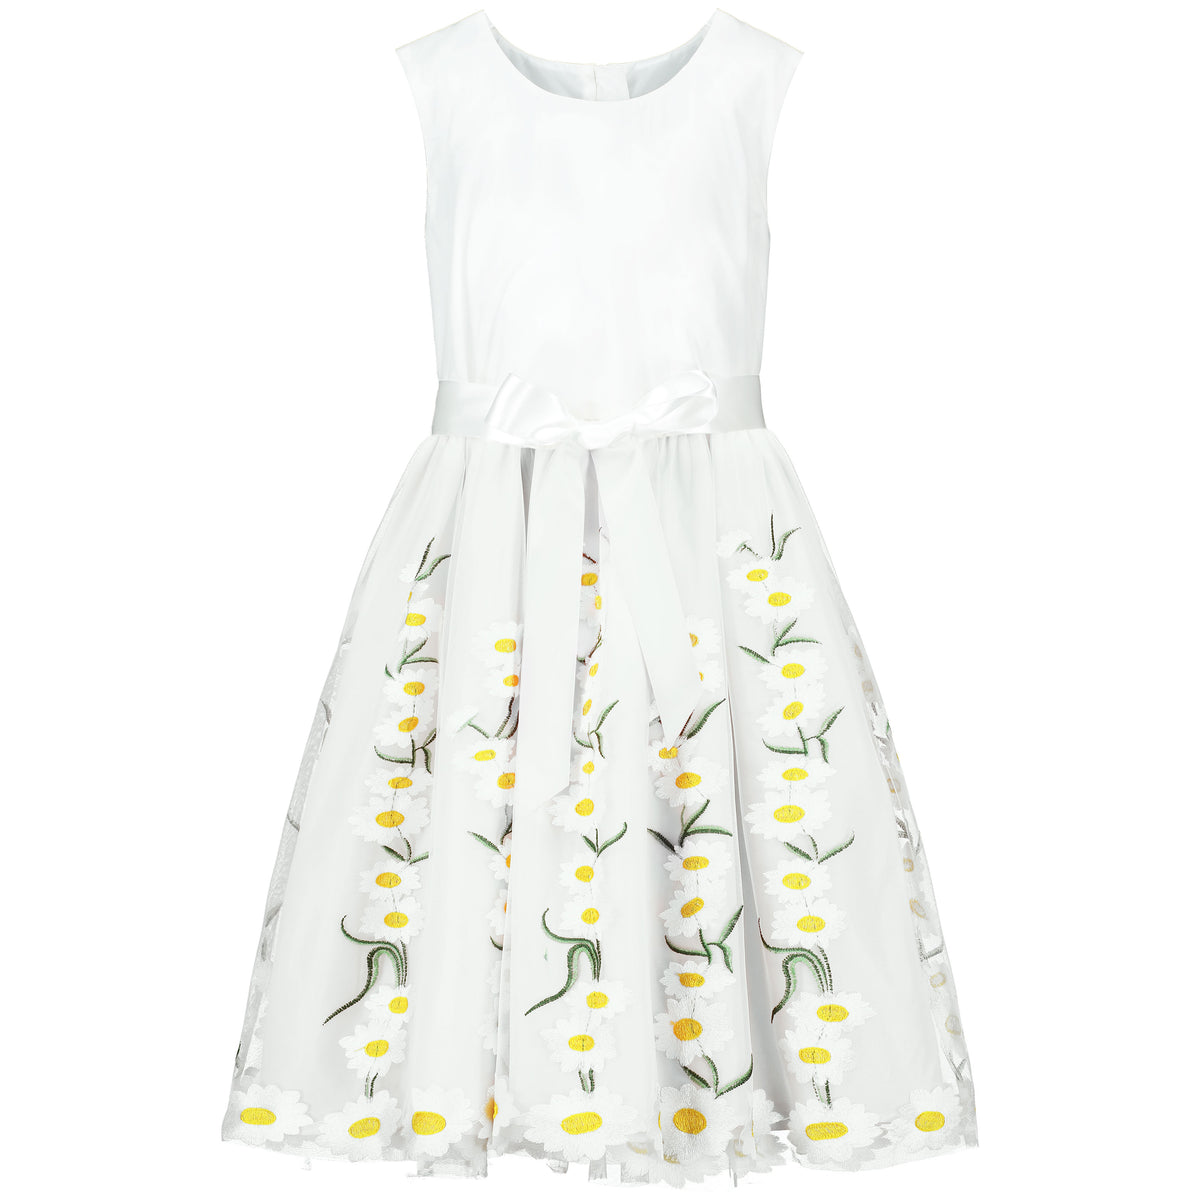 Girls Party Dress Daisy White Embroidered Tulle | Holly Hastie London